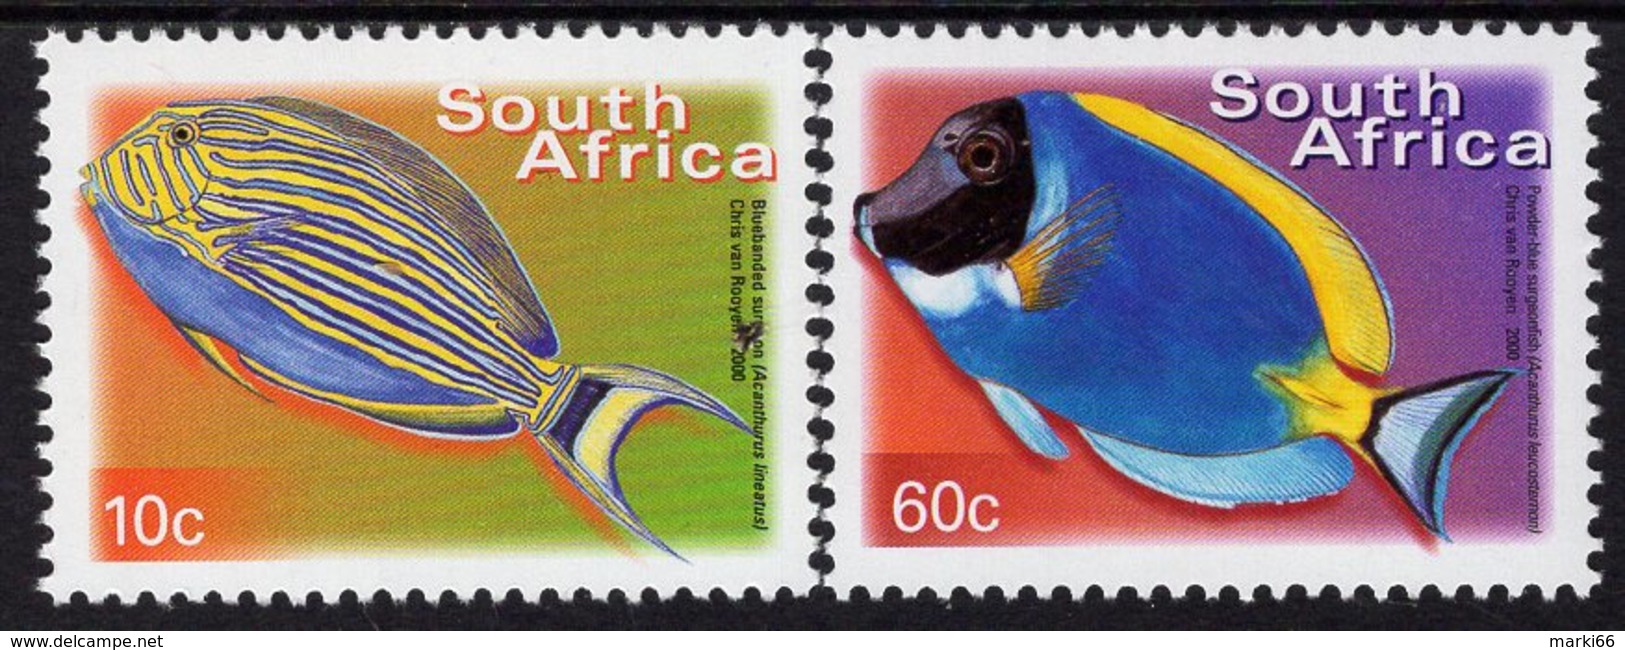 South Africa - 2014 - Colourful South Africa - Fish - 7th Definitive Series - Mint Stamp Set - Nuevos